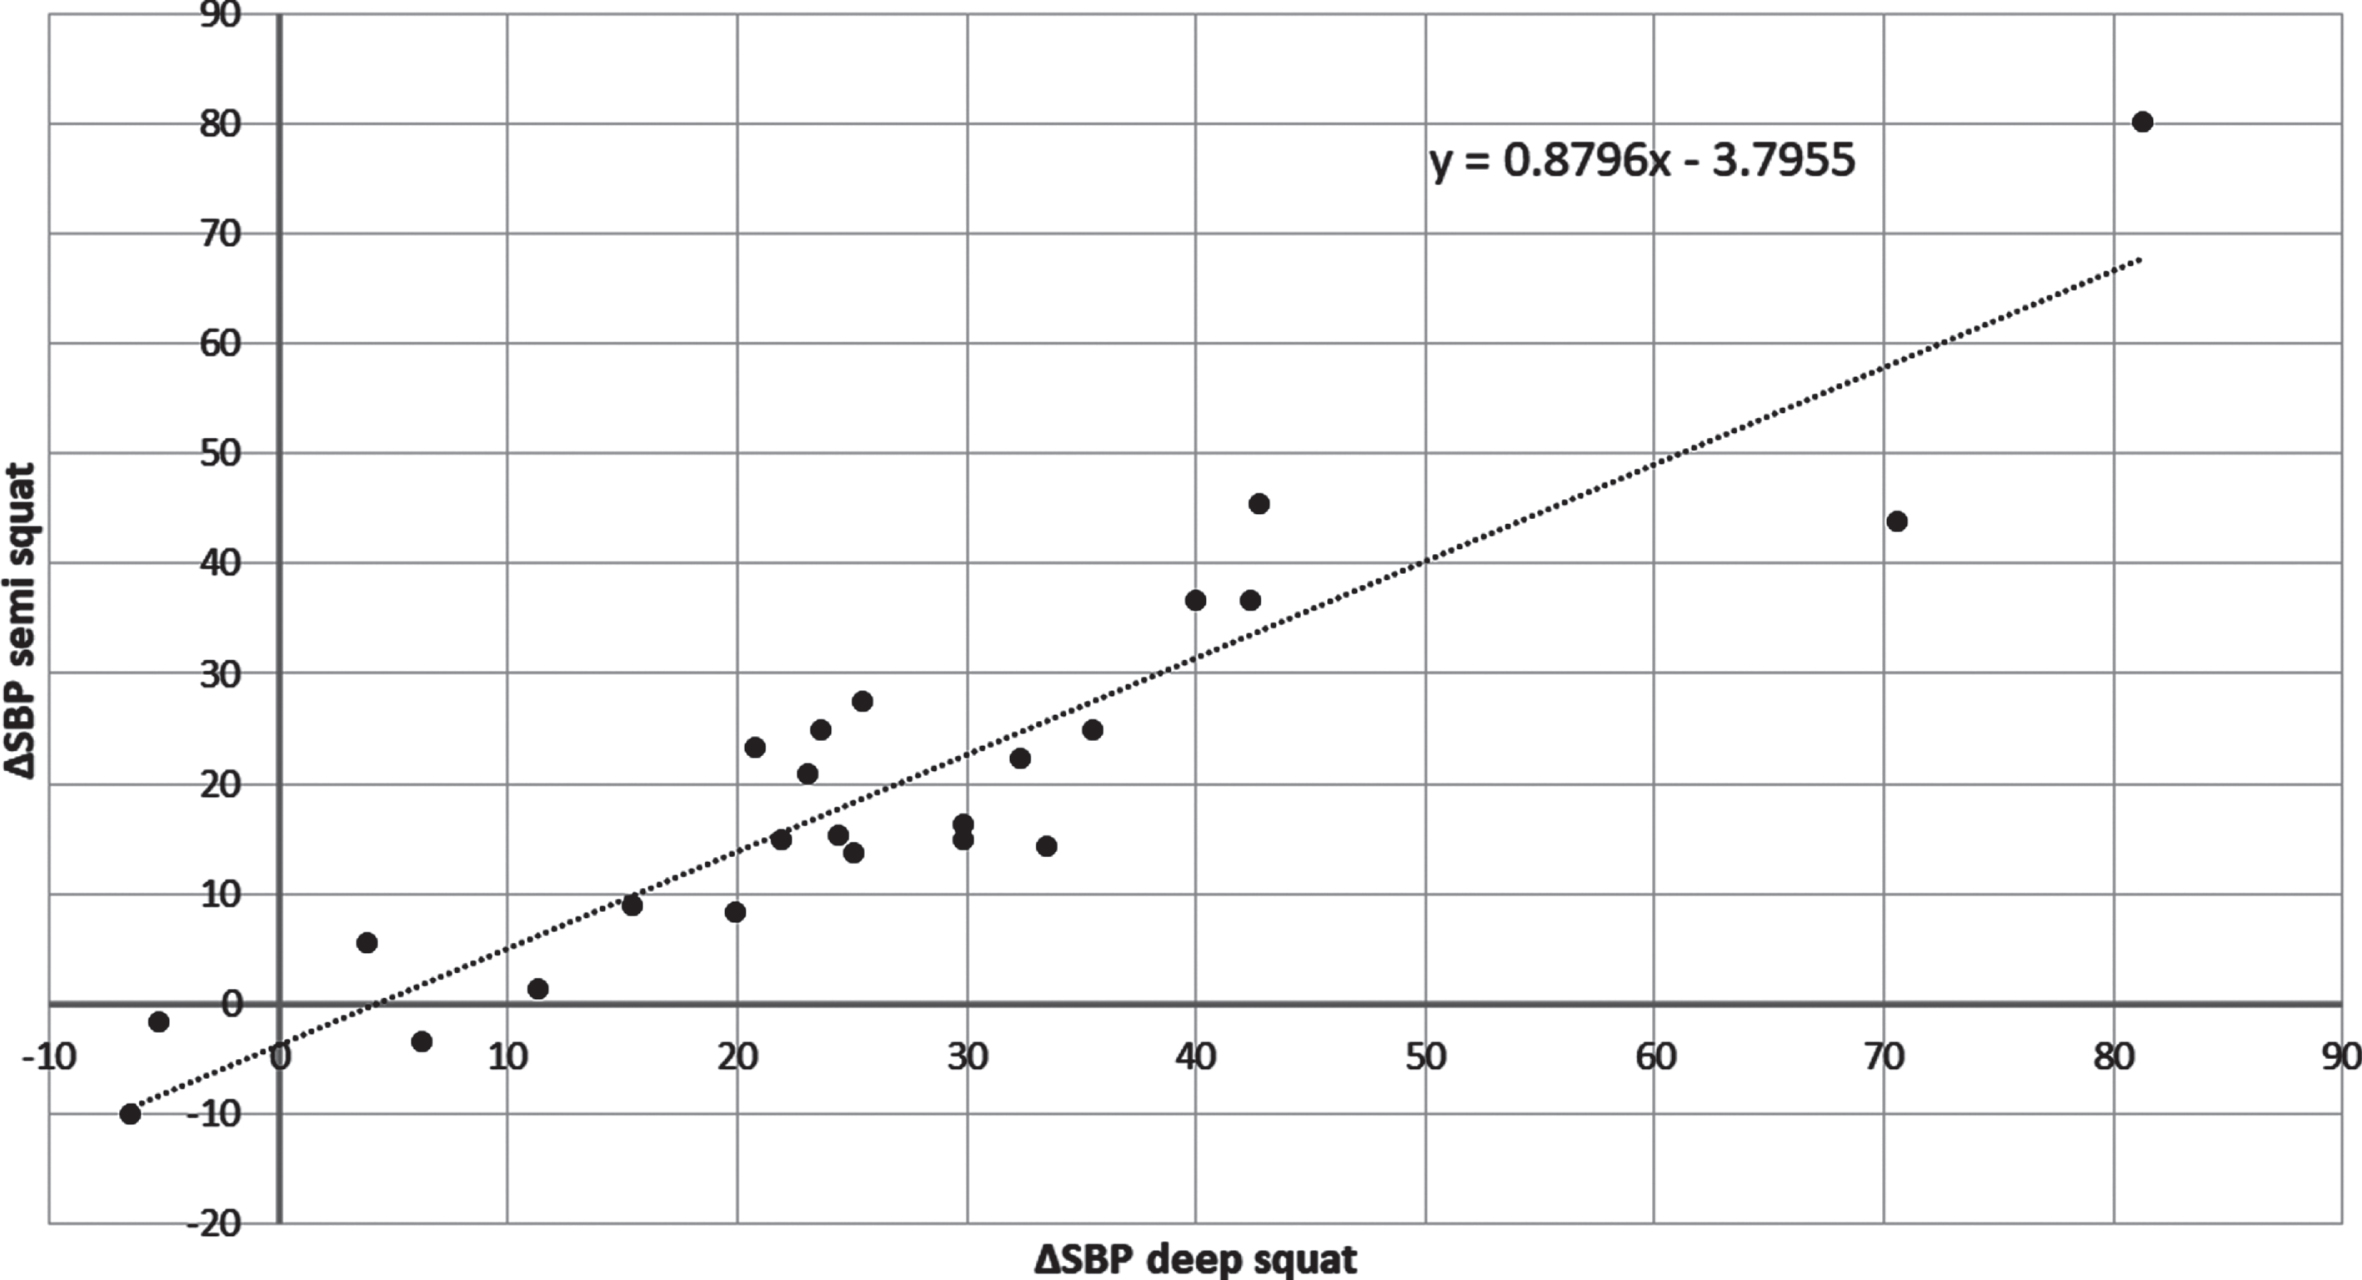 The correlation between ΔSBP during semi and deep squats in 24 PD subjects.